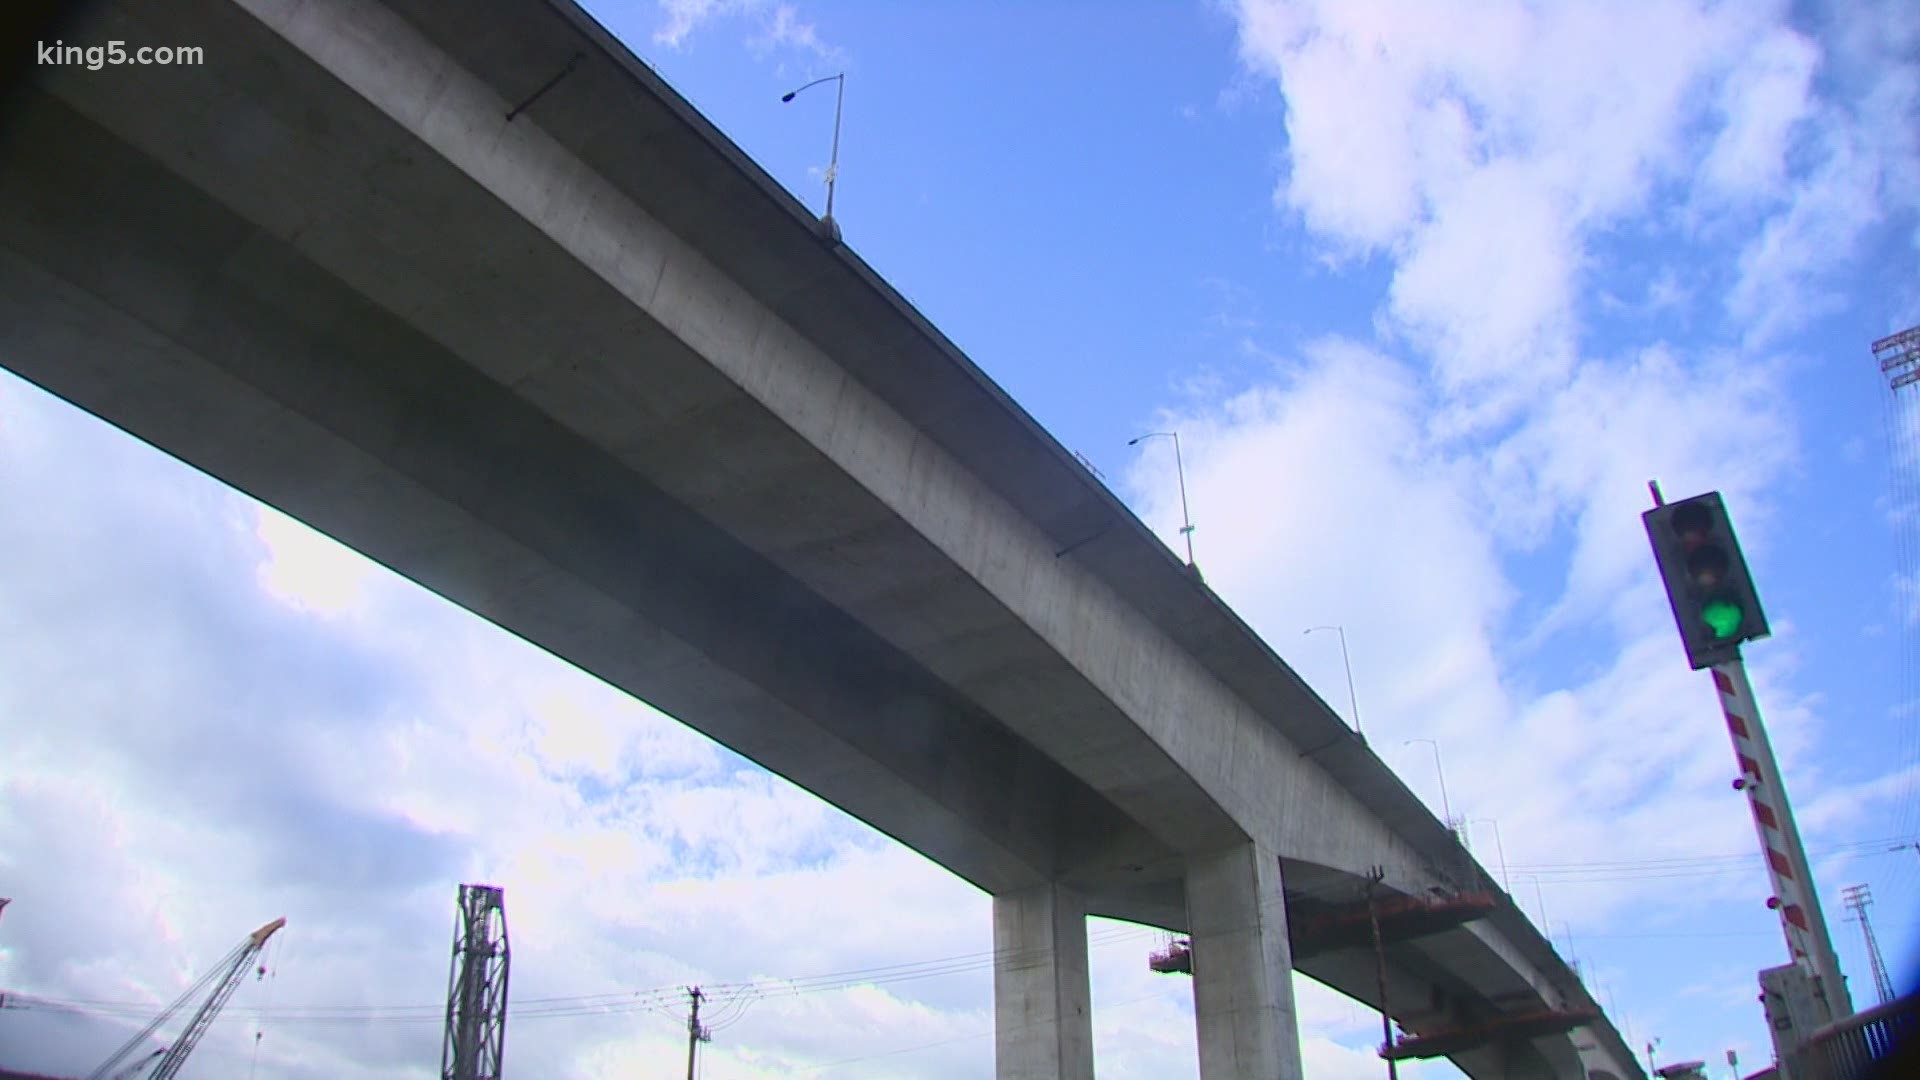 The best performing fixes for the West Seattle Bridge could cost around $1 billion, according to a cost-benefit analysis released by the SDOT.